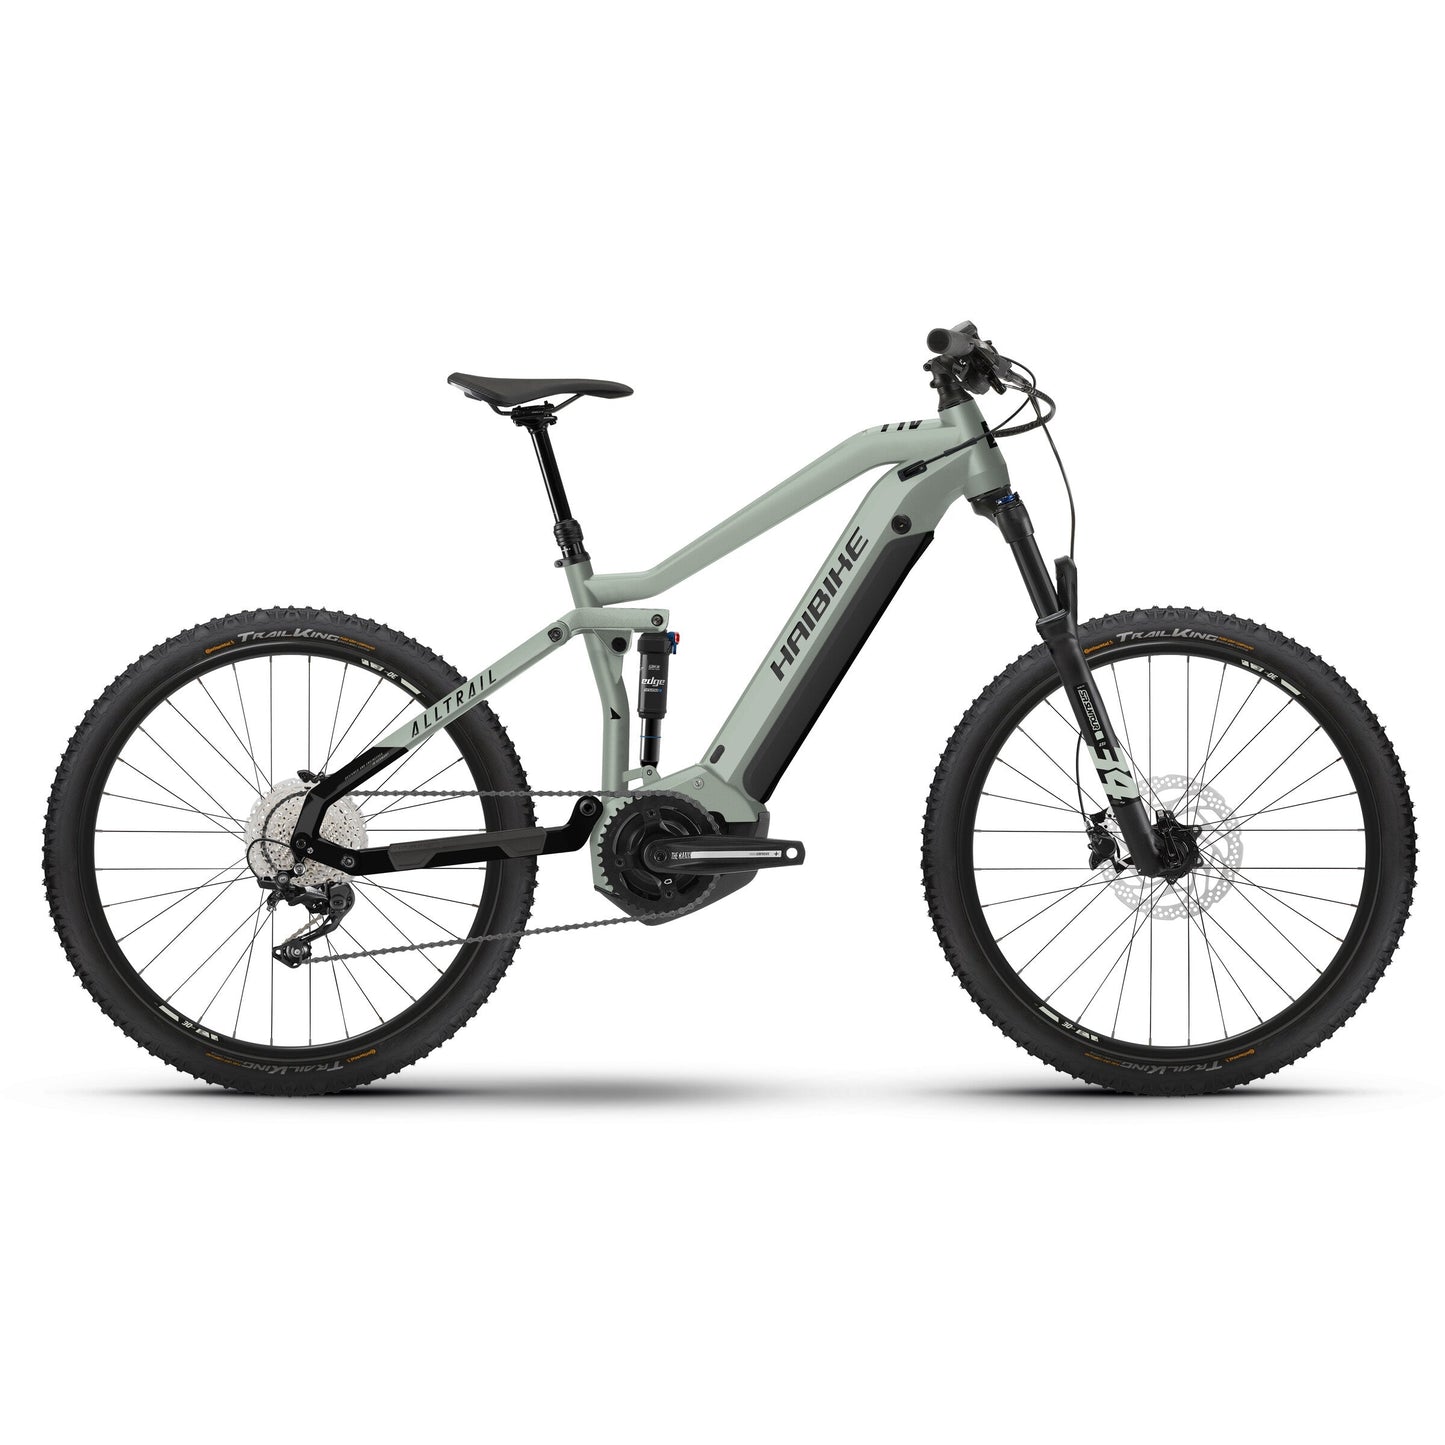 Two Day eBike Hire Experience Voucher for Two Riders